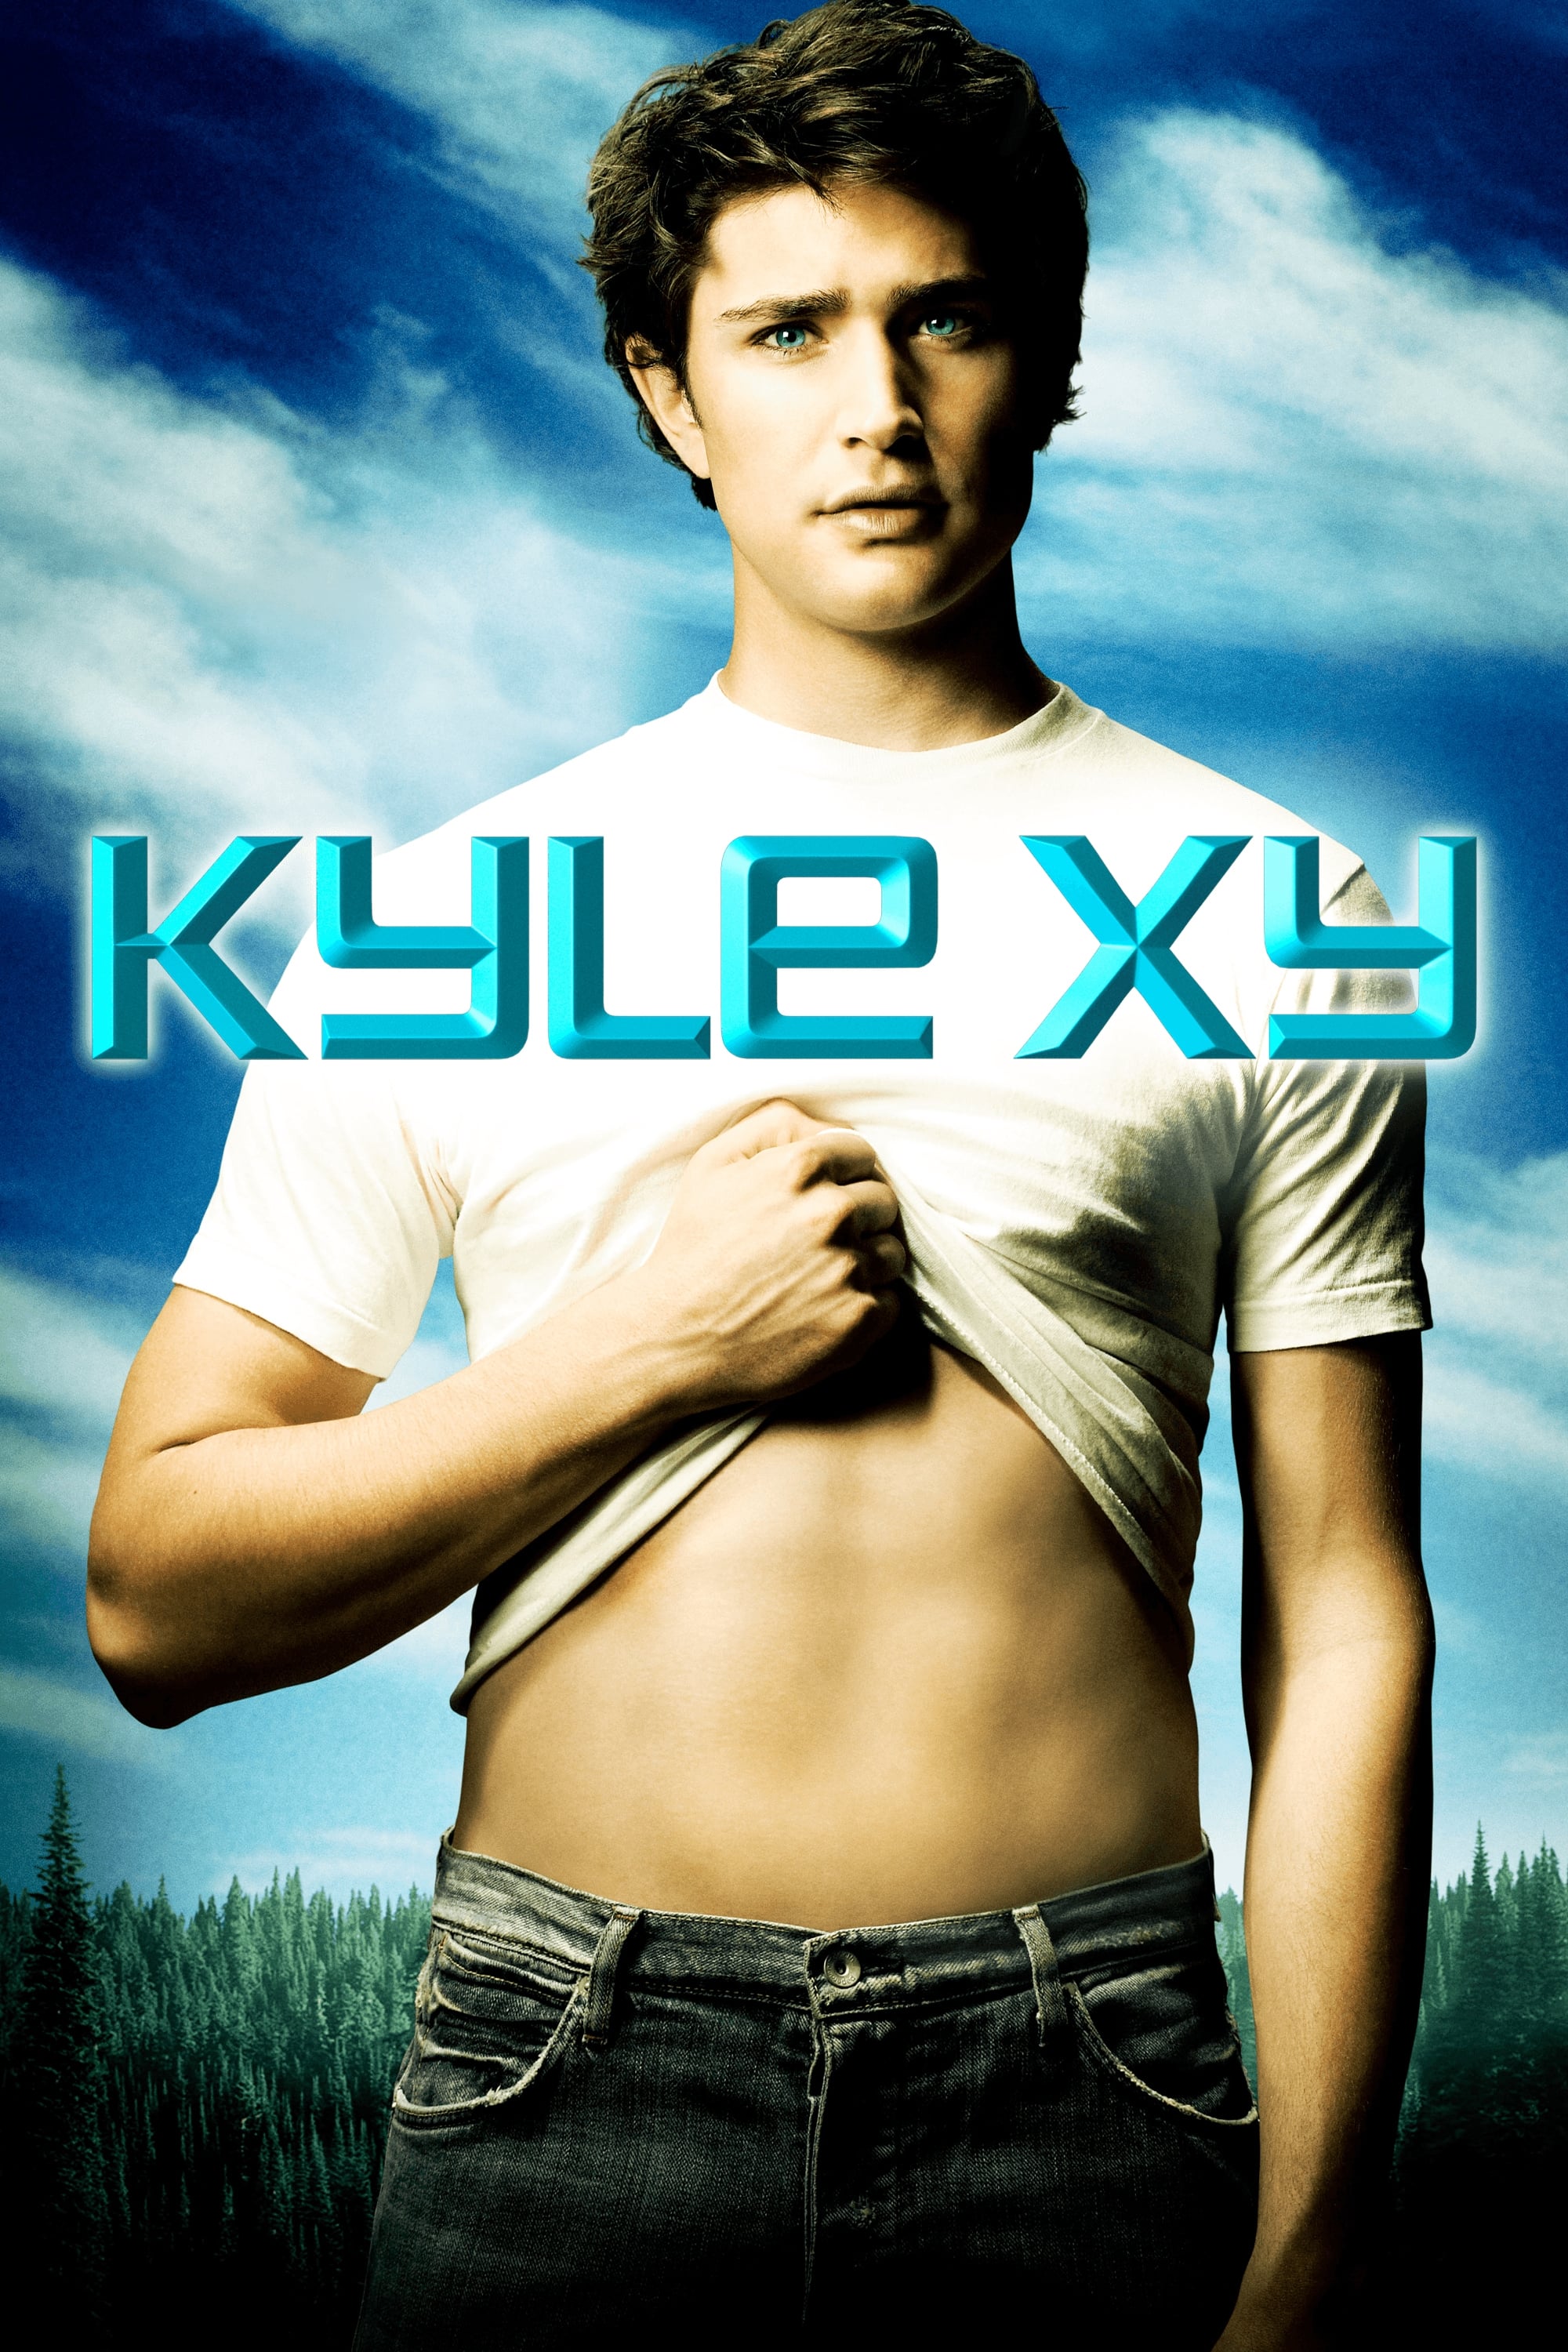 Kyle XY TV Shows About Fish Out Of Water